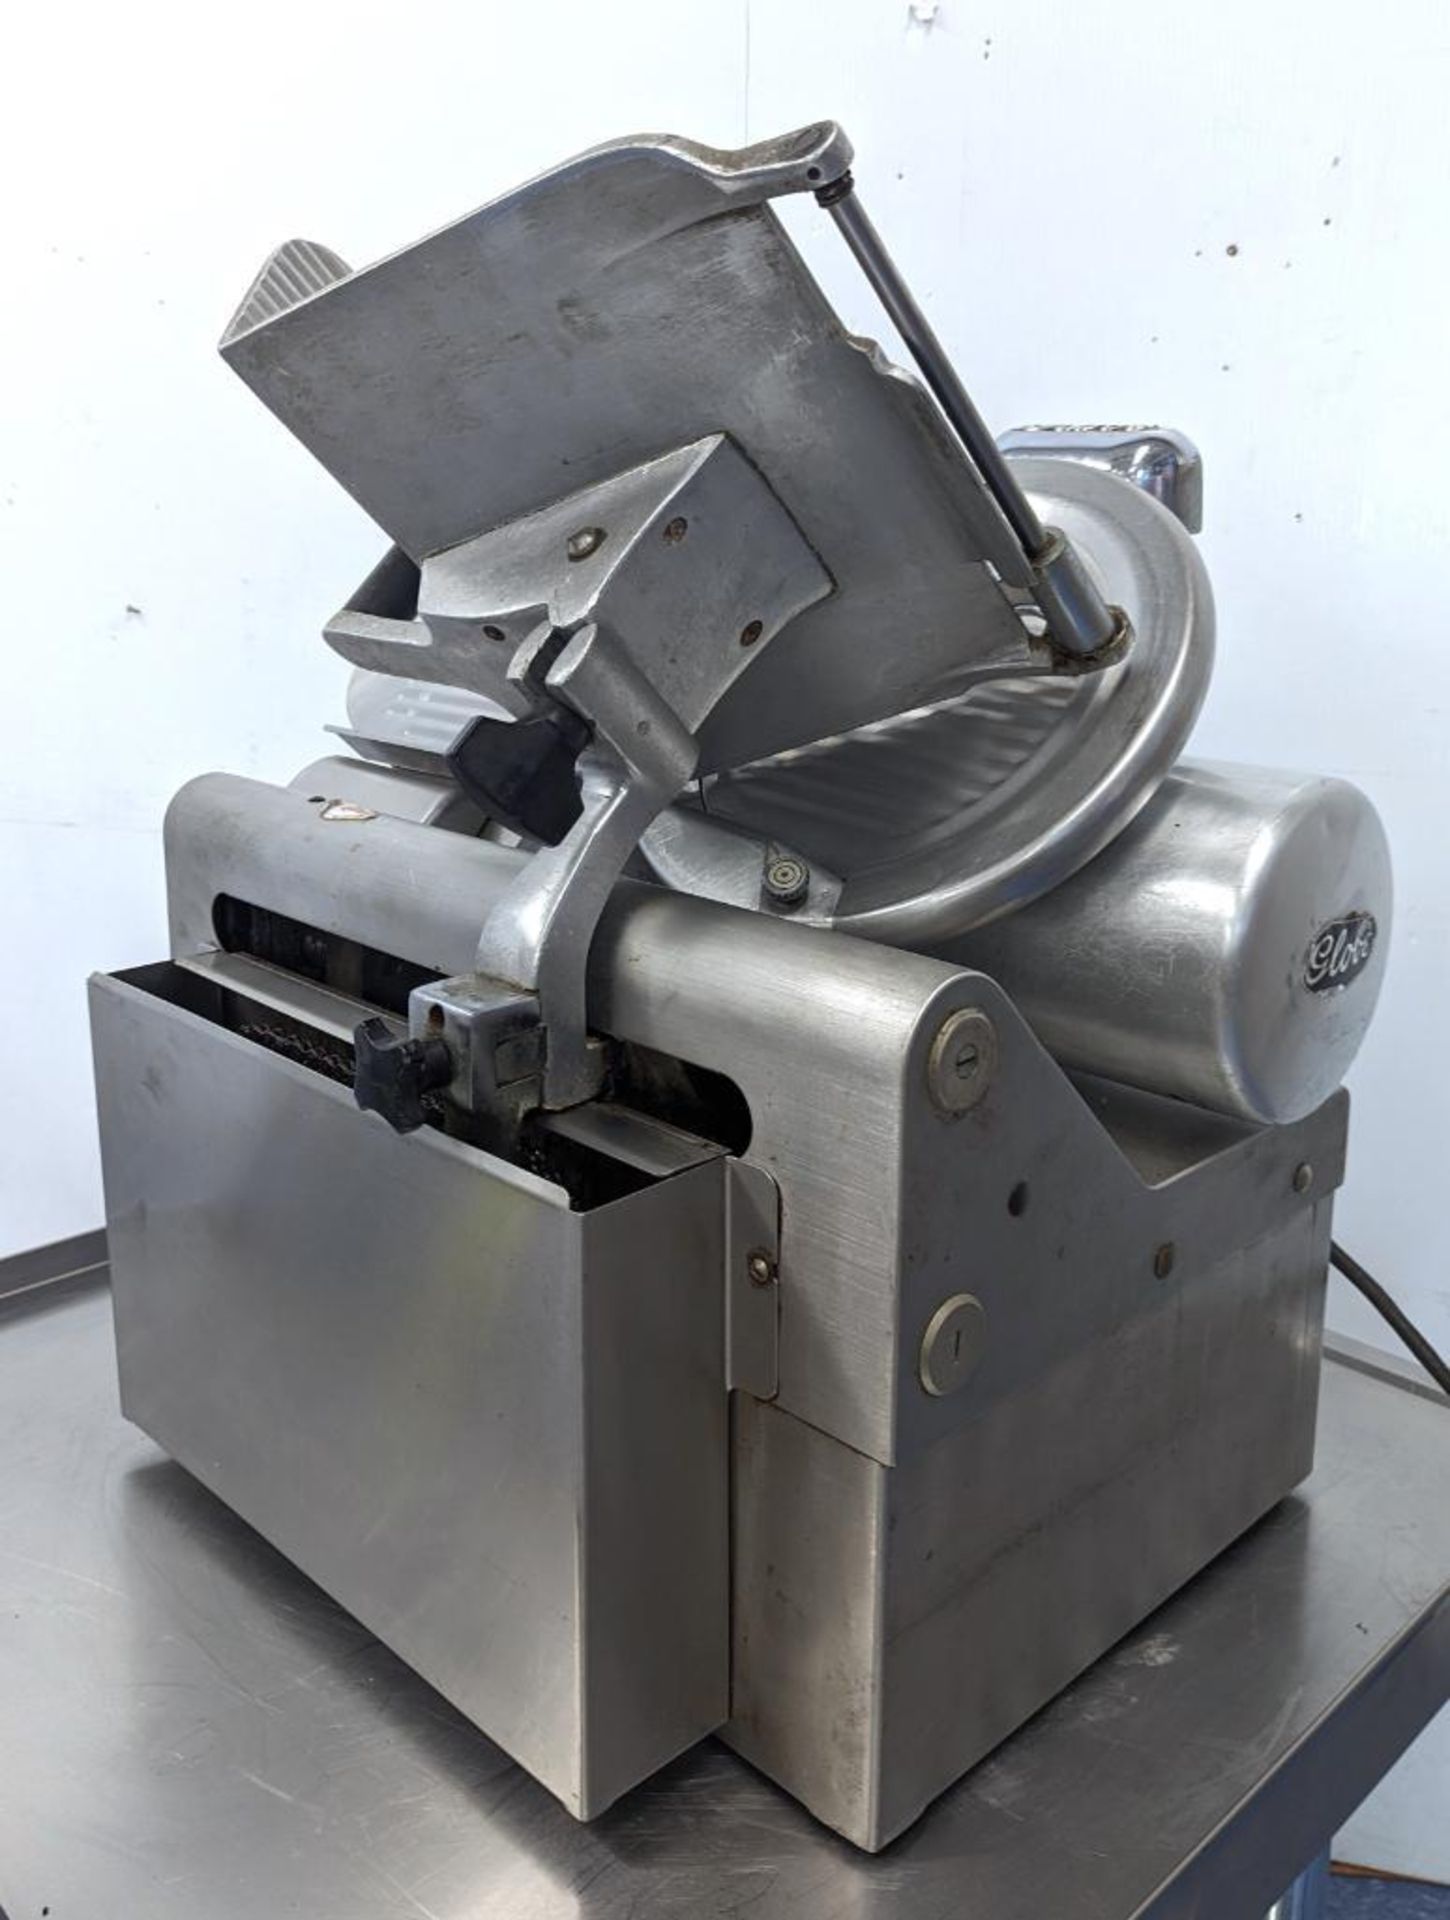 GLOBE 775 12" AUTOMATIC MEAT SLICER WITH BLADE SHARPENER - Image 2 of 14